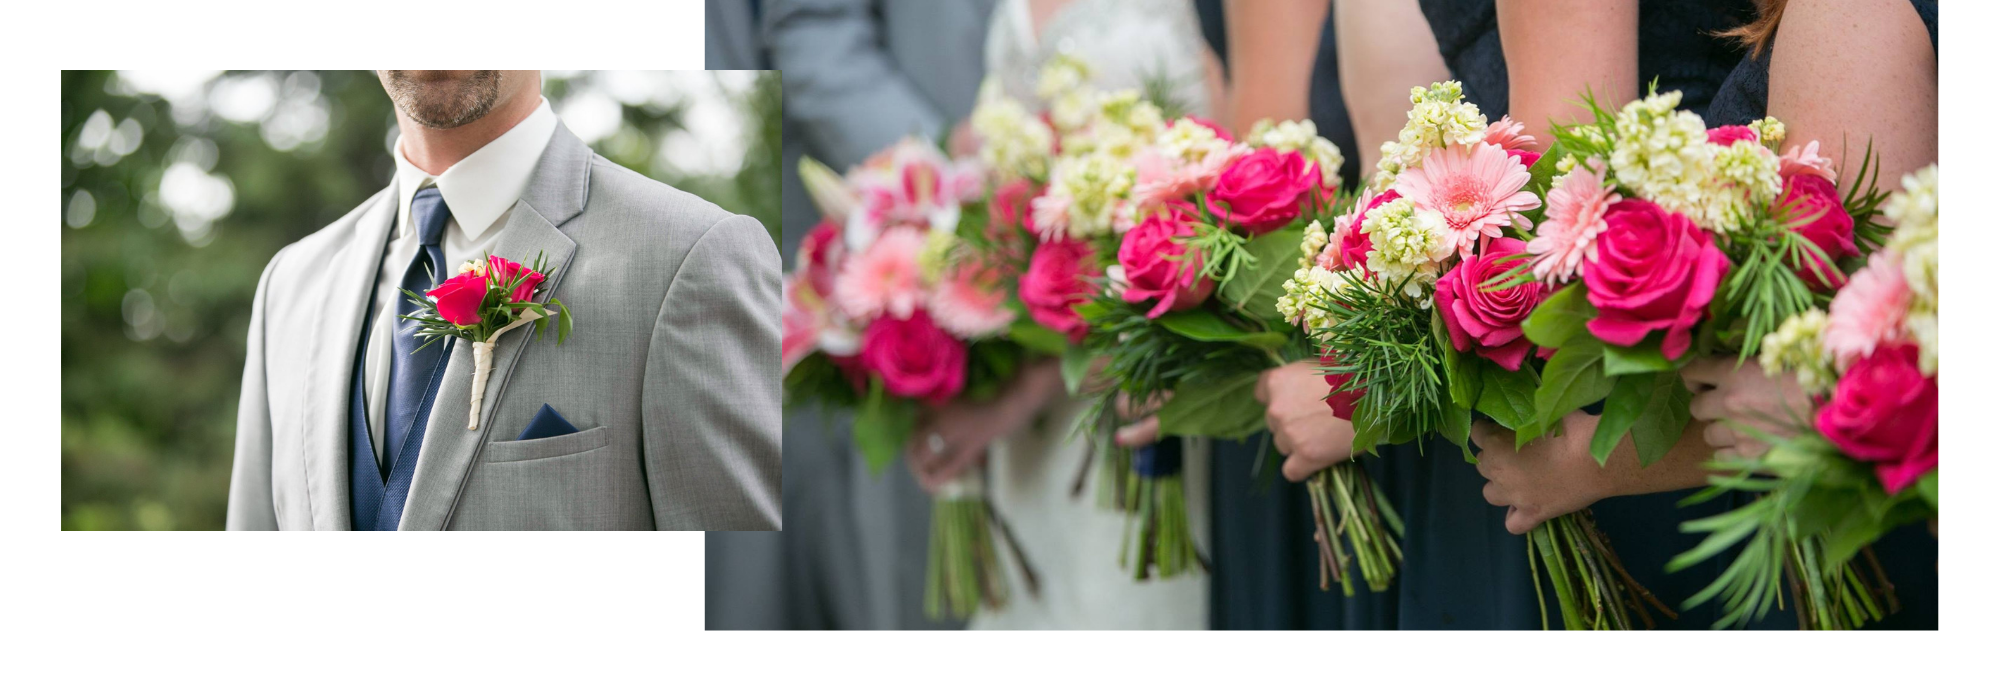 Wedding bouquets and a boutonniere 